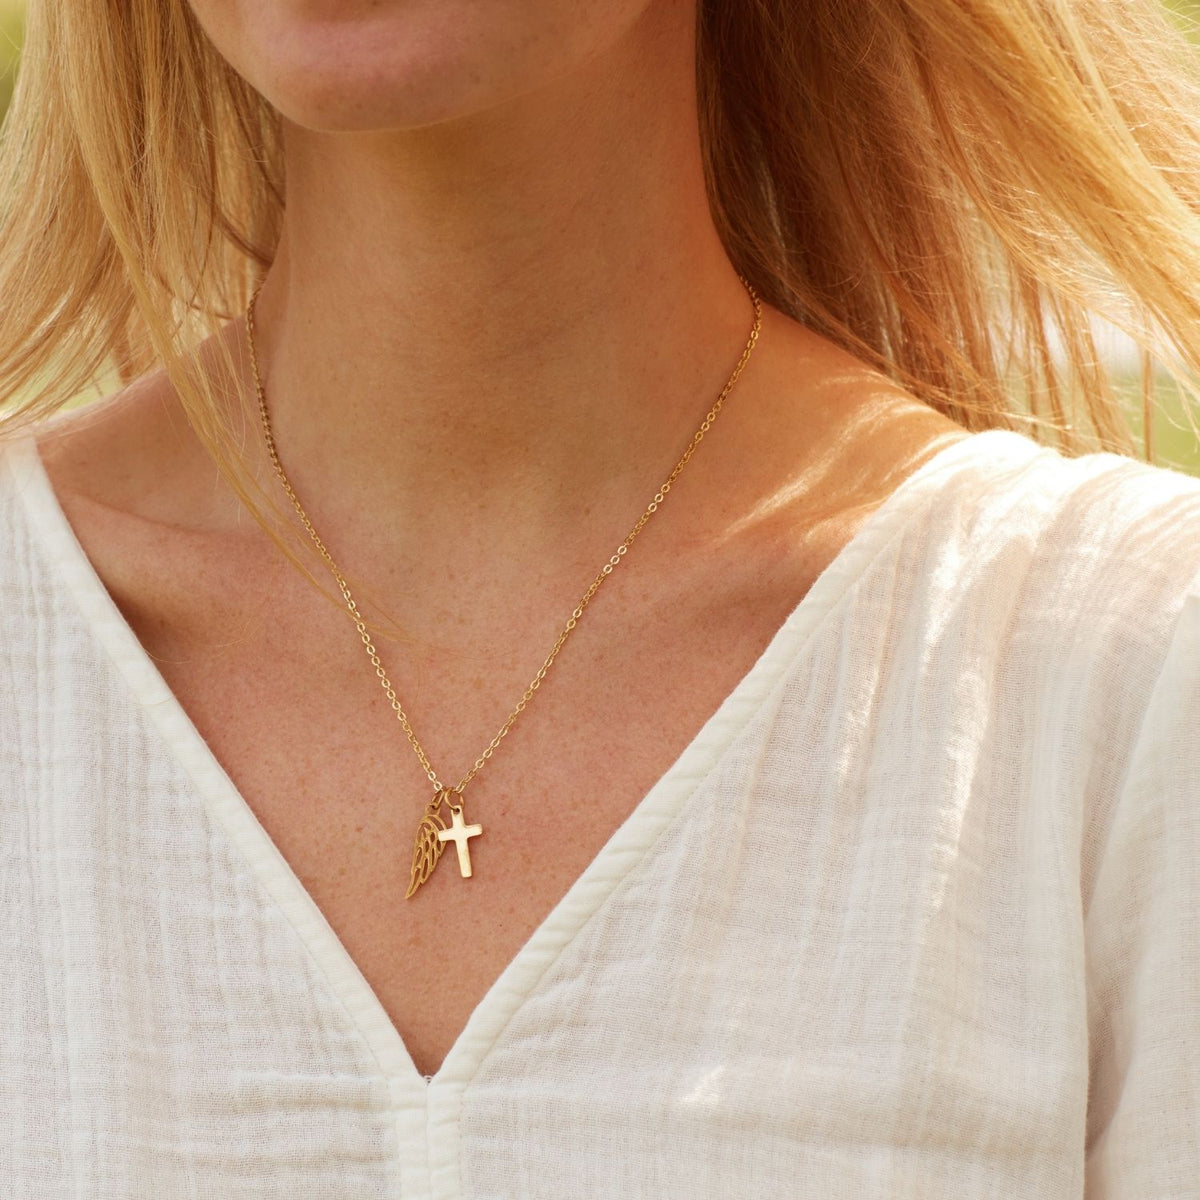 To the Mother of the Bride (From Daughter) | Today a Bride, Tomorrow a Wife | Cross Necklace